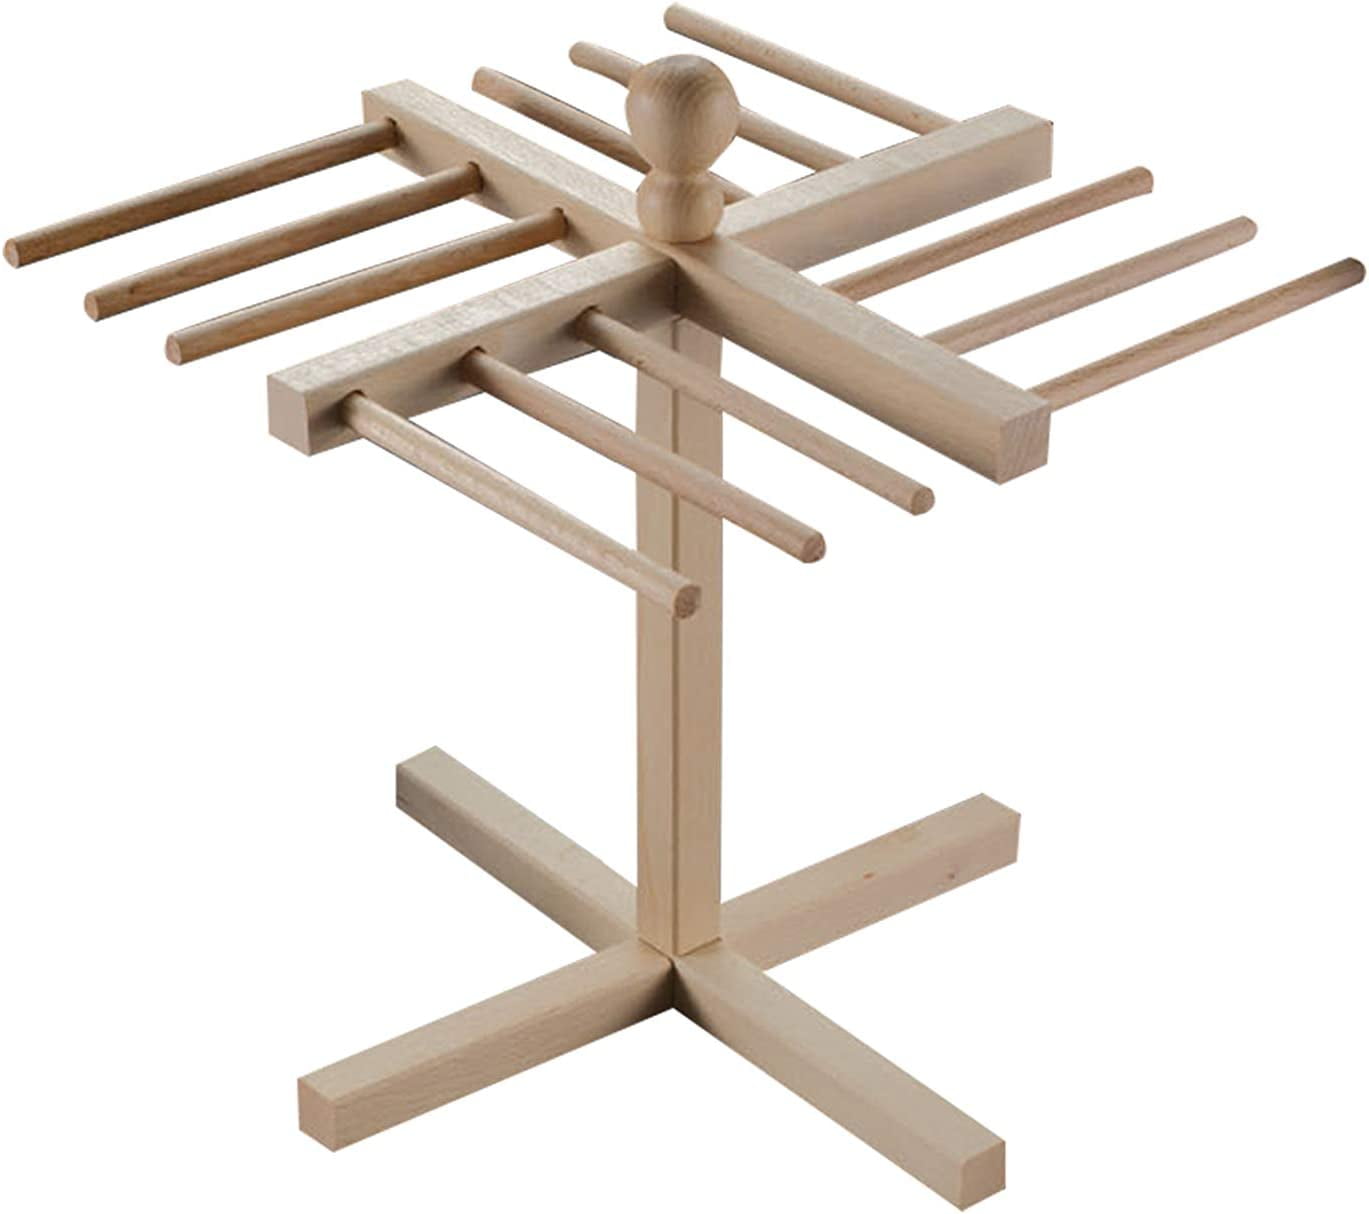 Pasta Drying Rack By Imperia - Made in Italy with Italian Beech Wood  Construction - Holds 1lb of Pasta 